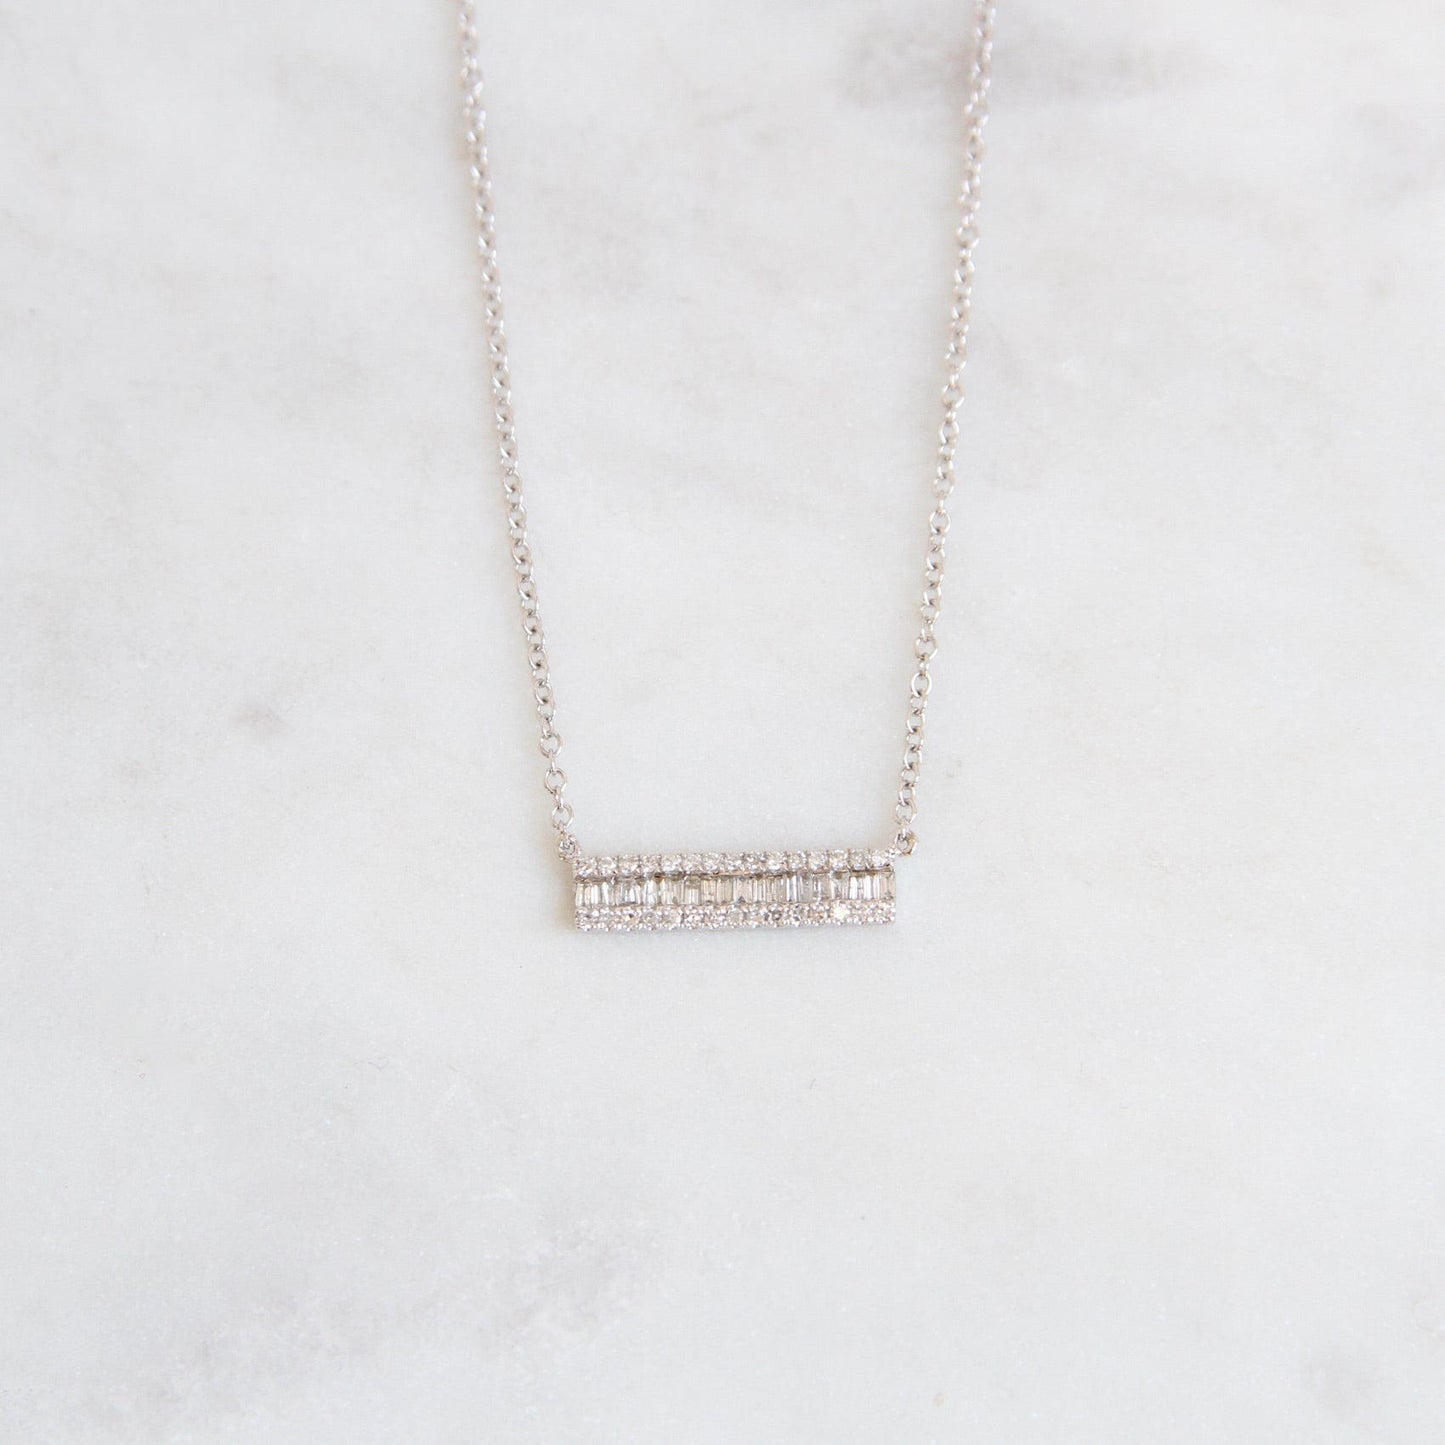 NKL-14K 14K White Gold Channel Baguette with Diamond Edge Bar Necklace